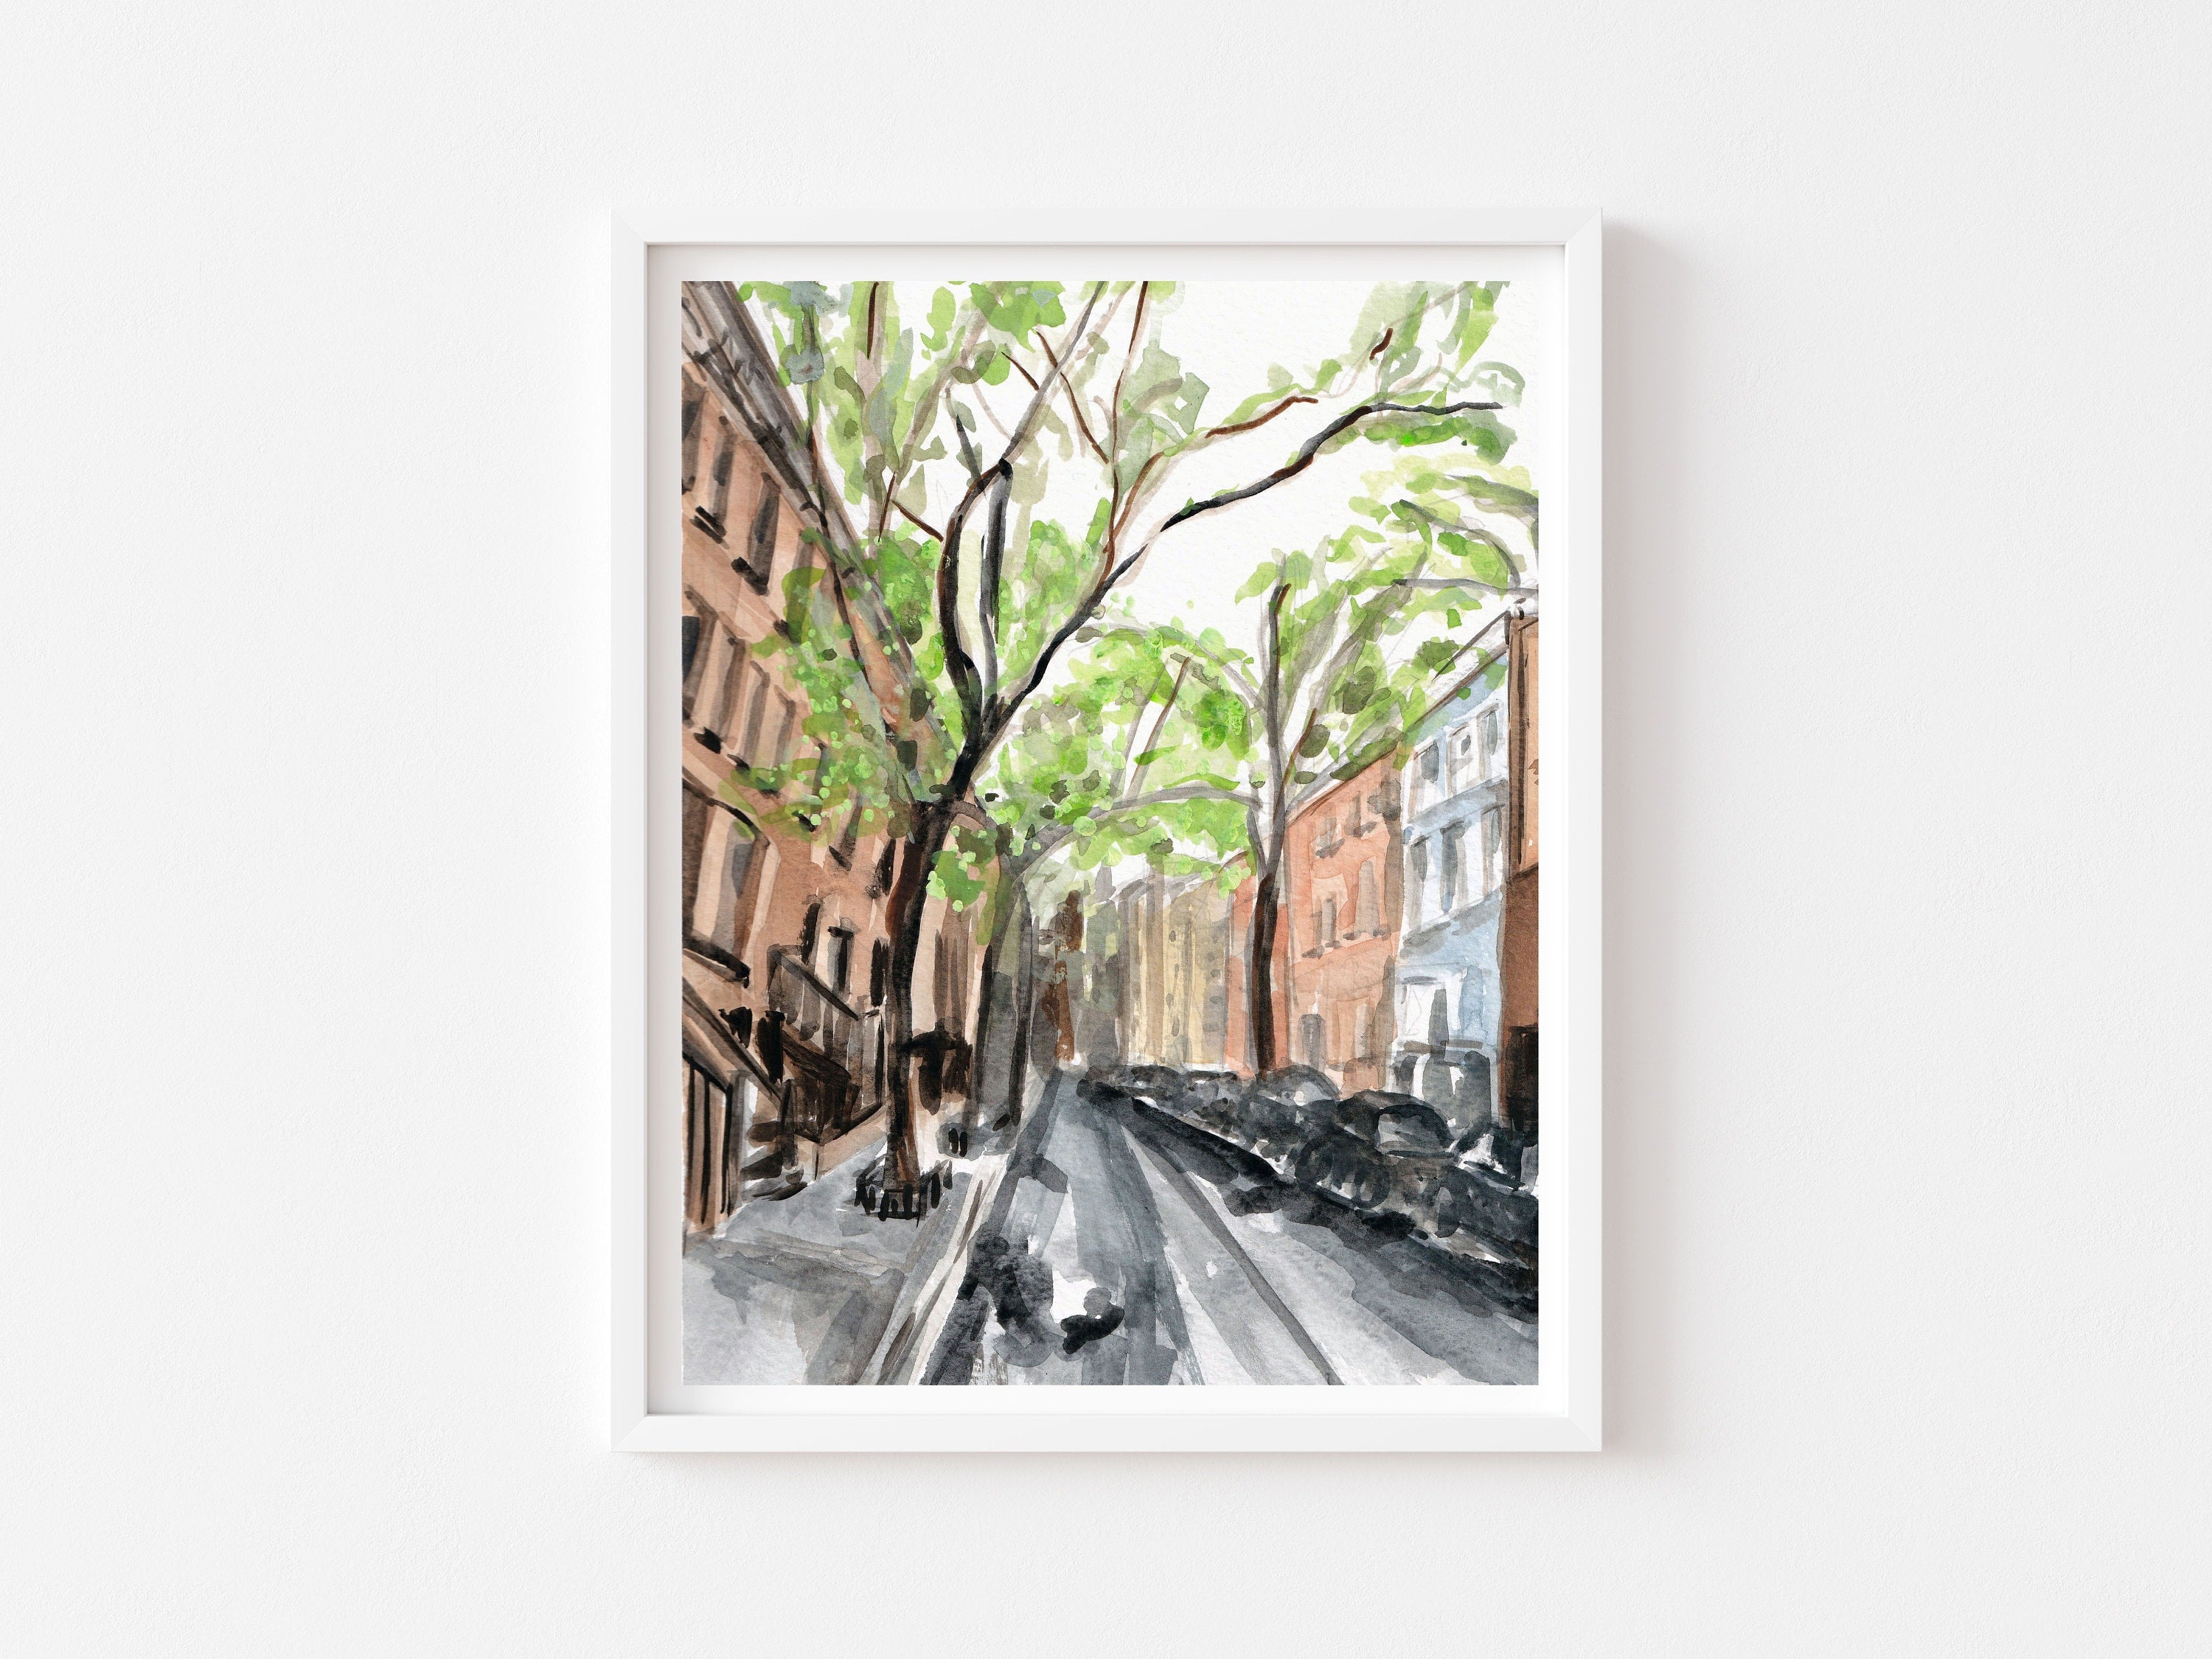 New York city streetscape print of painting by Medjool Studio. Print of original gouache painting that is a slightly abstract interpretation of the classic architecture. Shows a scene looking down a street with tall buildings, cars and trees along the sides of the street.